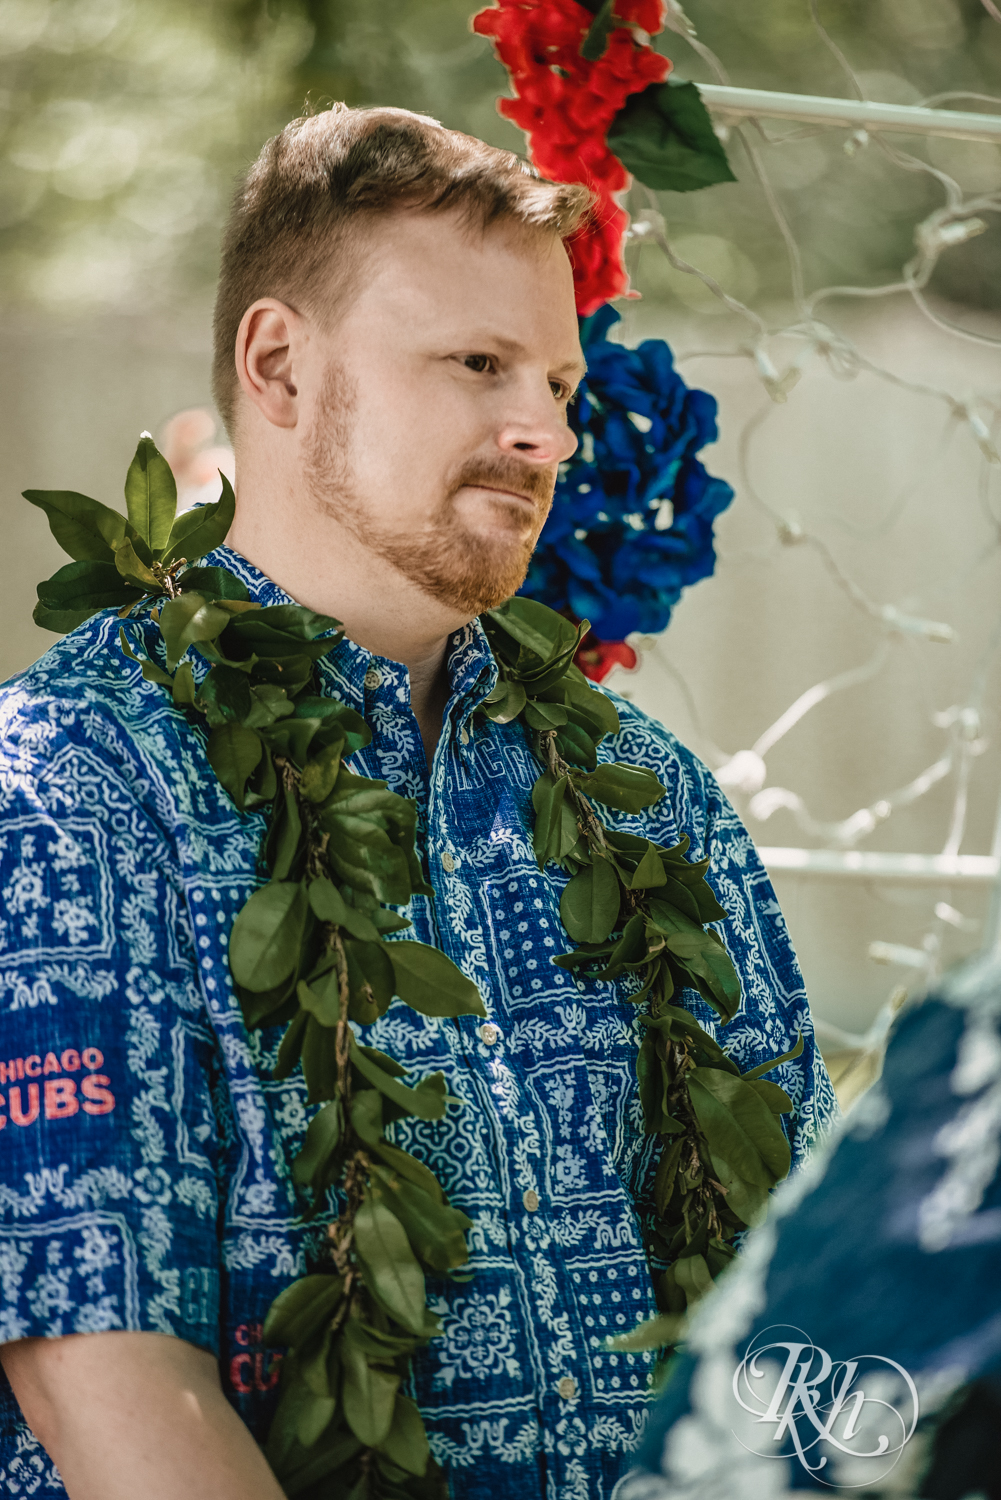 Two grooms hold hands during backyard elopement ceremony while wearing Hawaiian shirts and leis.